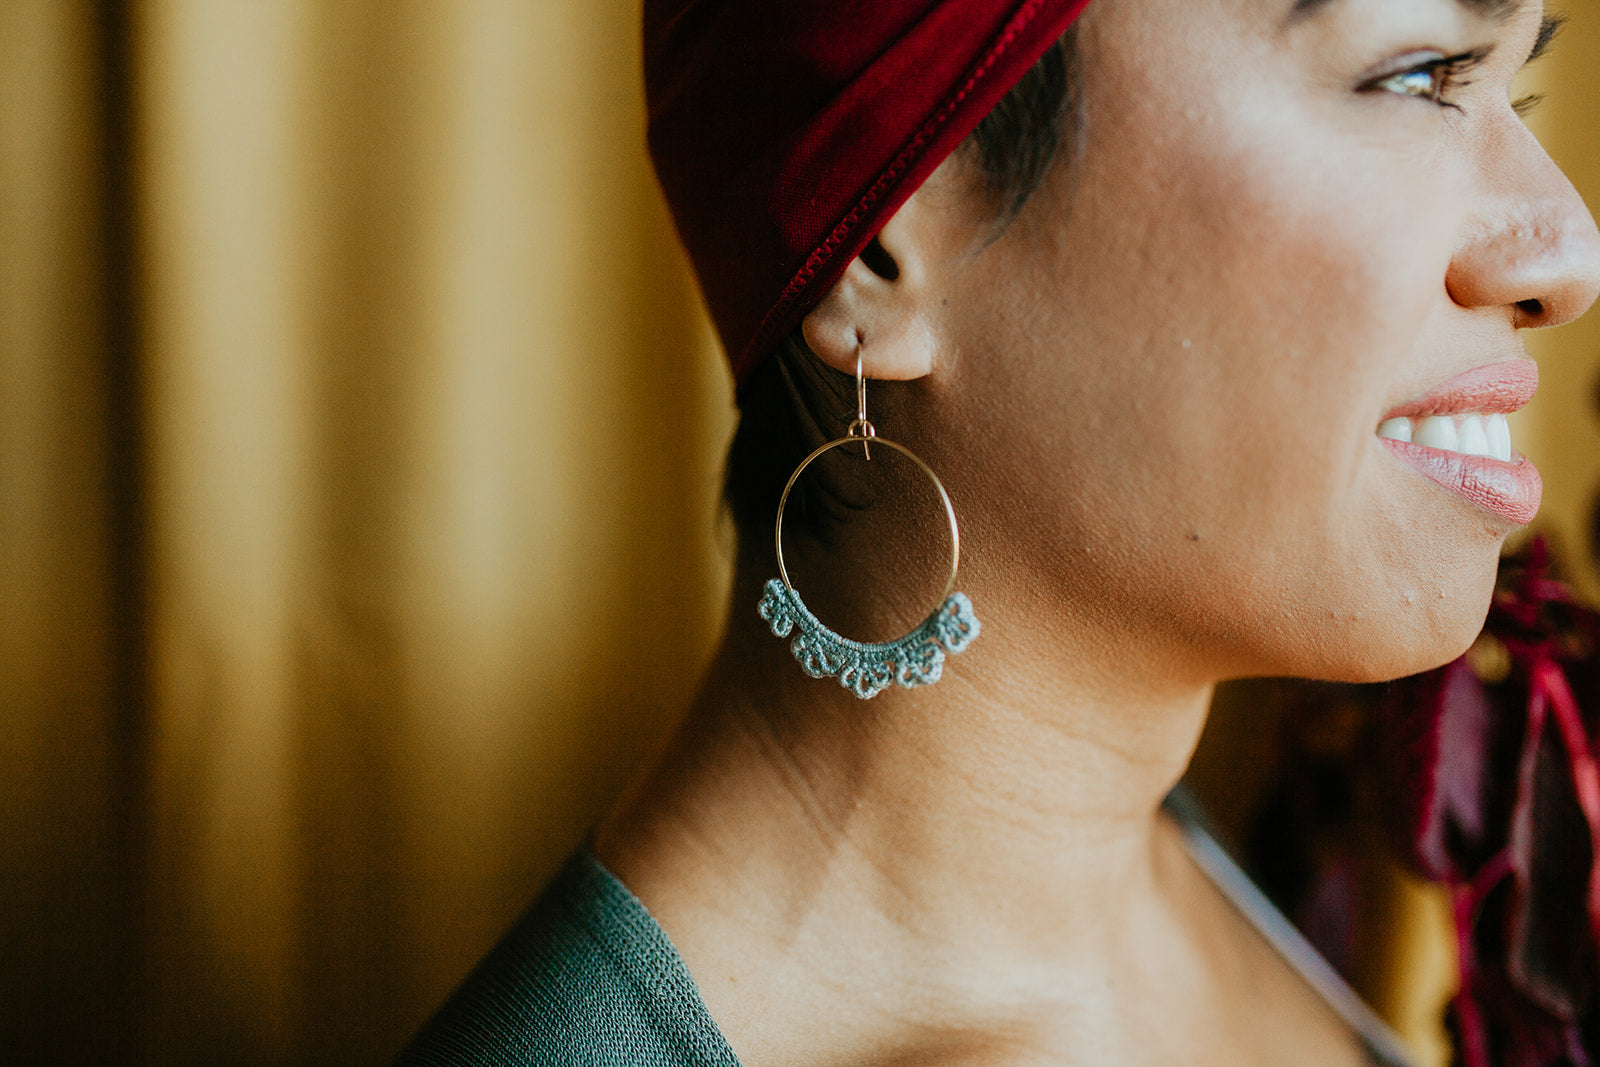 The side profile of a person smiling and wearing a Twyla Dill Large Fleur Earring that is 14kt Gold-Plated and has Slate hand-crocheted lace